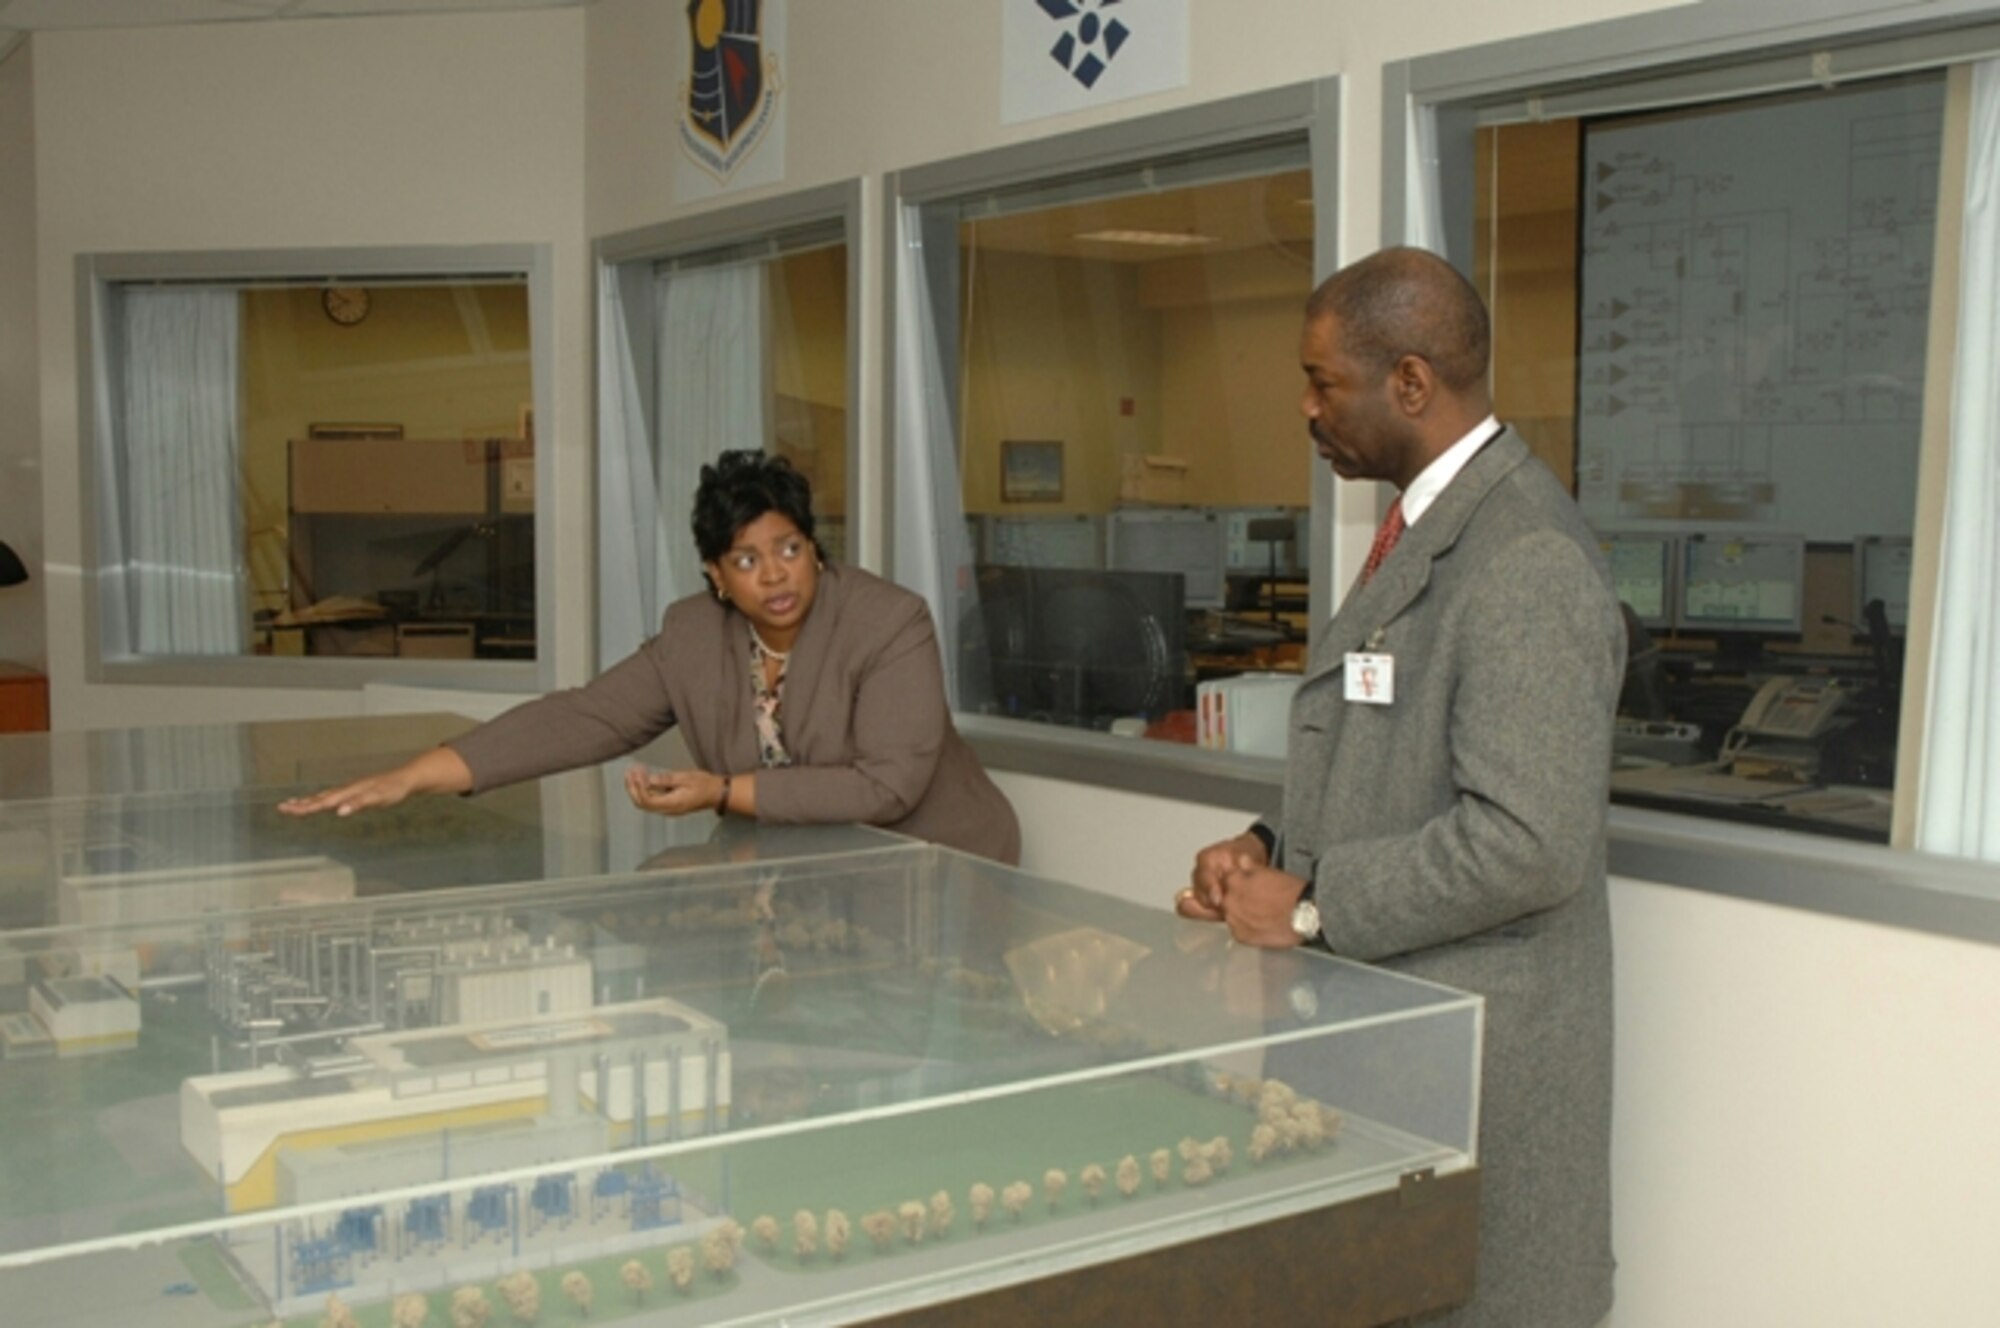 Raquel March explains the role of the Aeropropulsion Systems Test Facility at Arnold Engineering Development Center, Arnold Air Force Base, Tenn., to Neville Thompson during his tour of the base Feb. 23. Mr. Thompson, a senior engineer in the office of the deputy assistant Sscretary of the Air Force (Science, Technology and Engineering), was the guest speaker at AEDC’s annual African American Heritage luncheon held at the Arnold Lakeside Club Feb. 23.